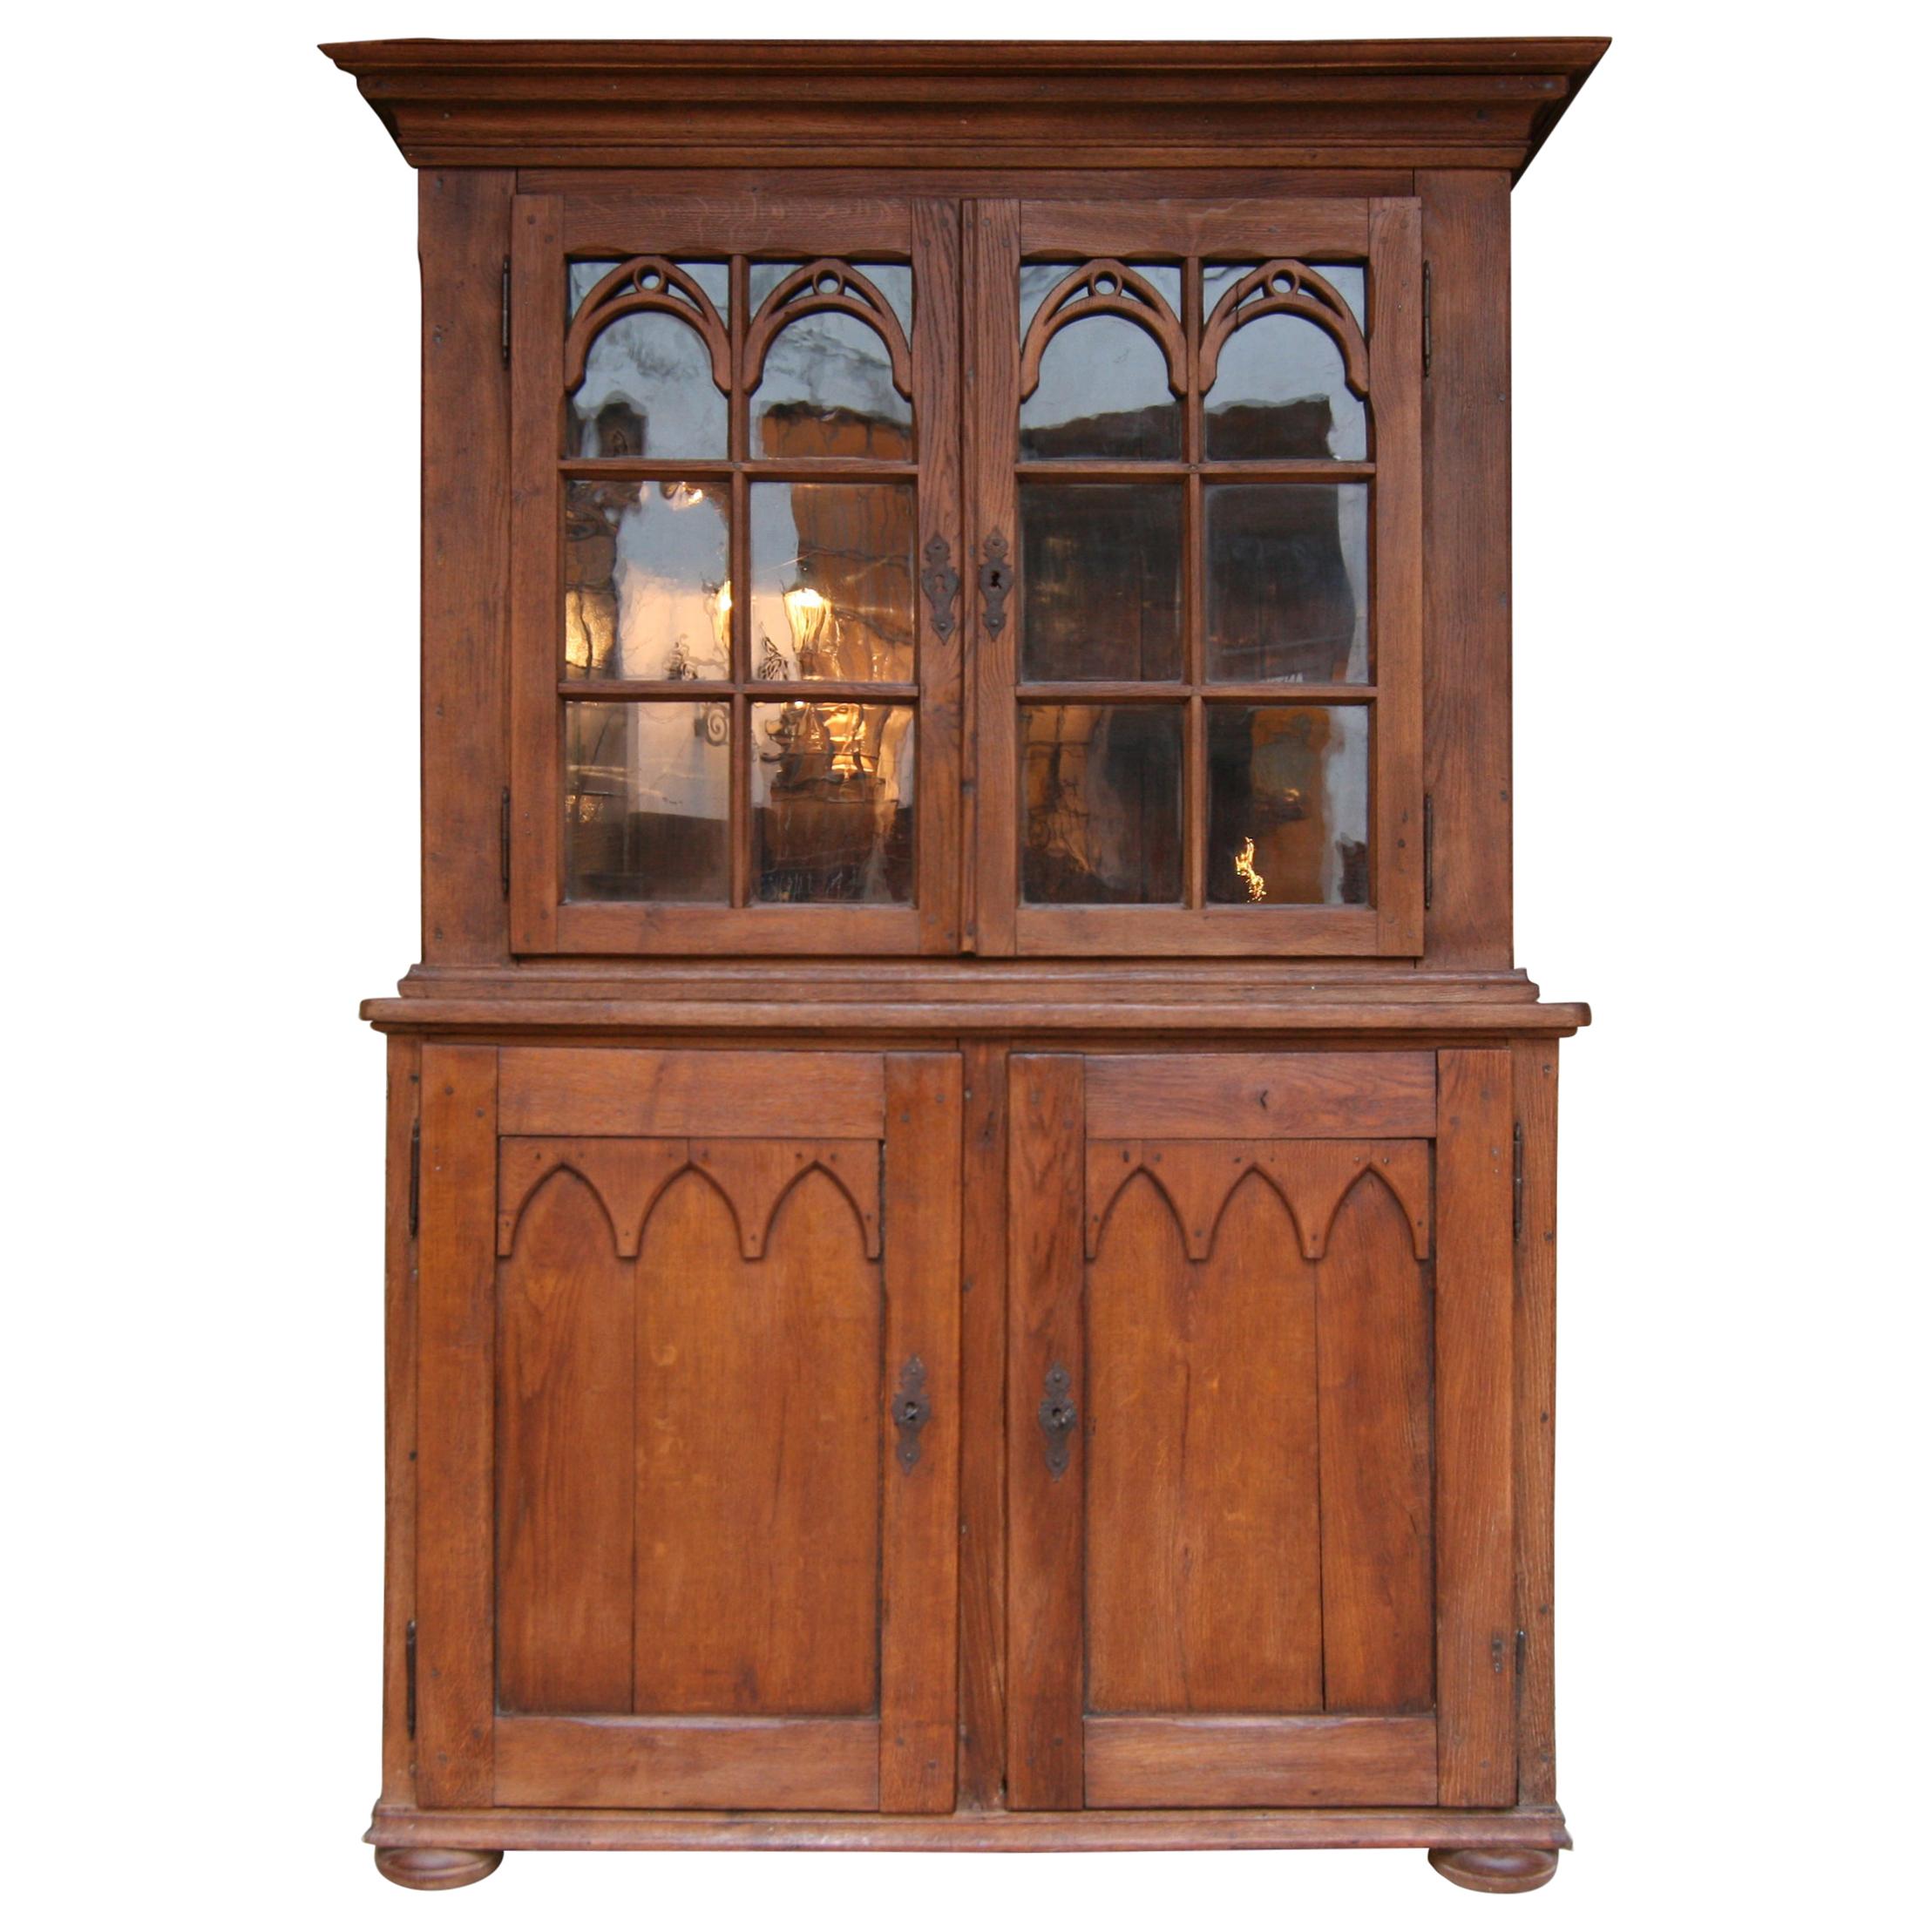 18th Century Display Cabinet made of Oak